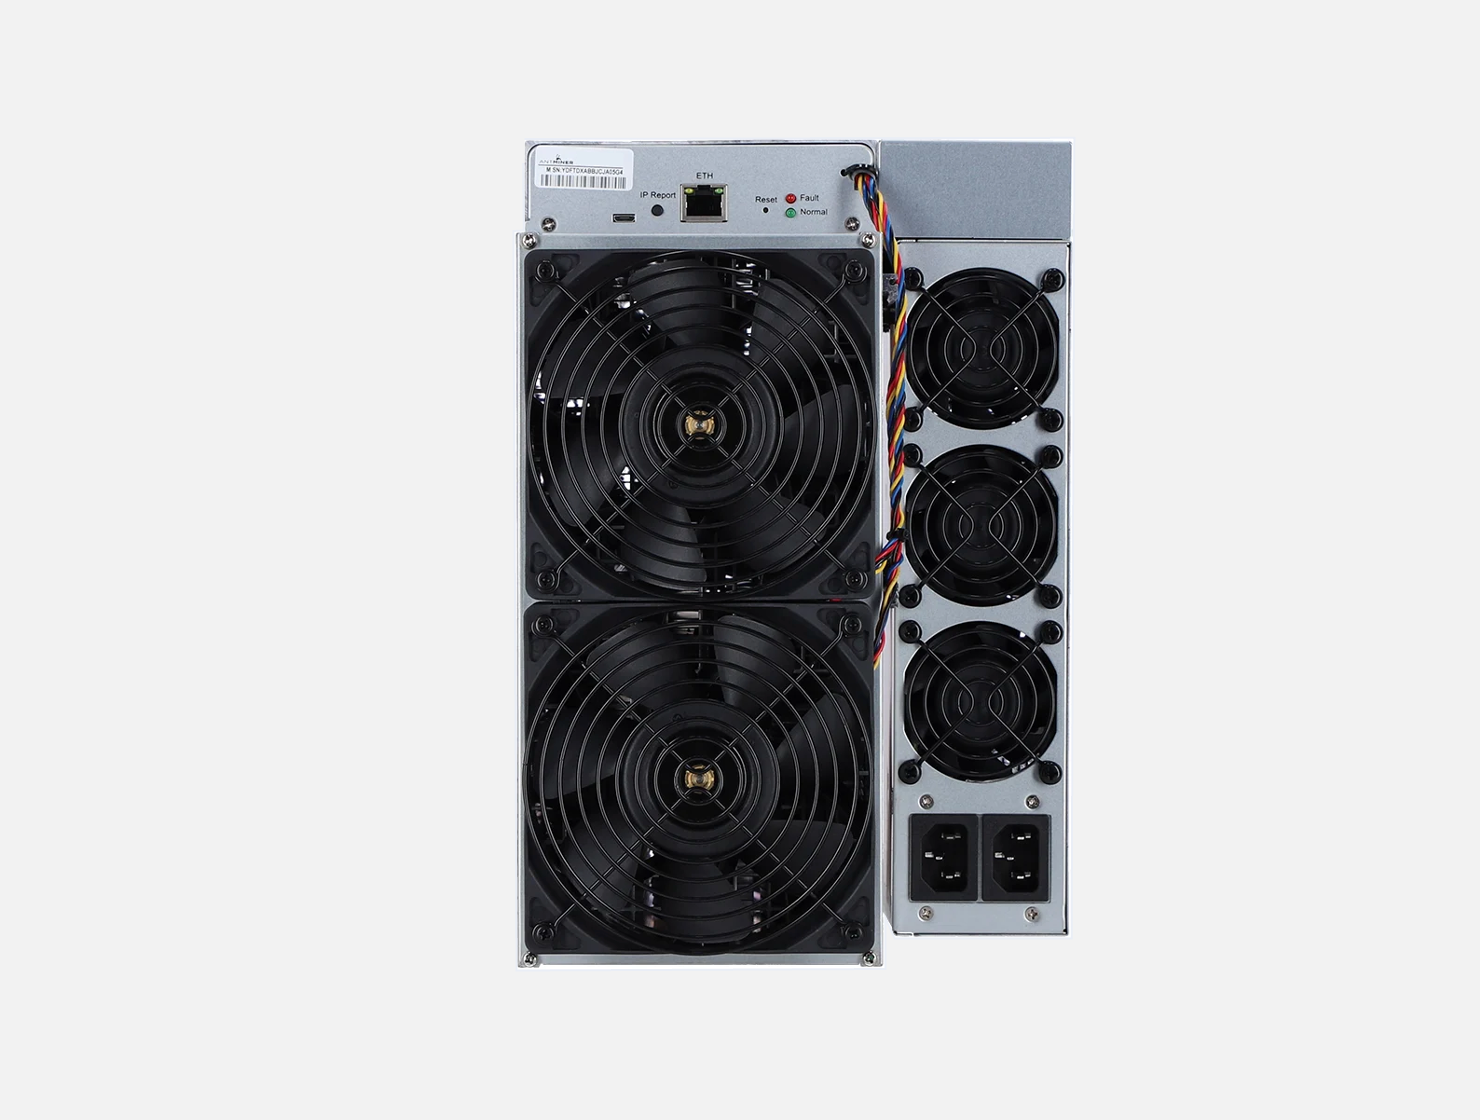 Antminer S19k Pro and S19 Profitability Guide